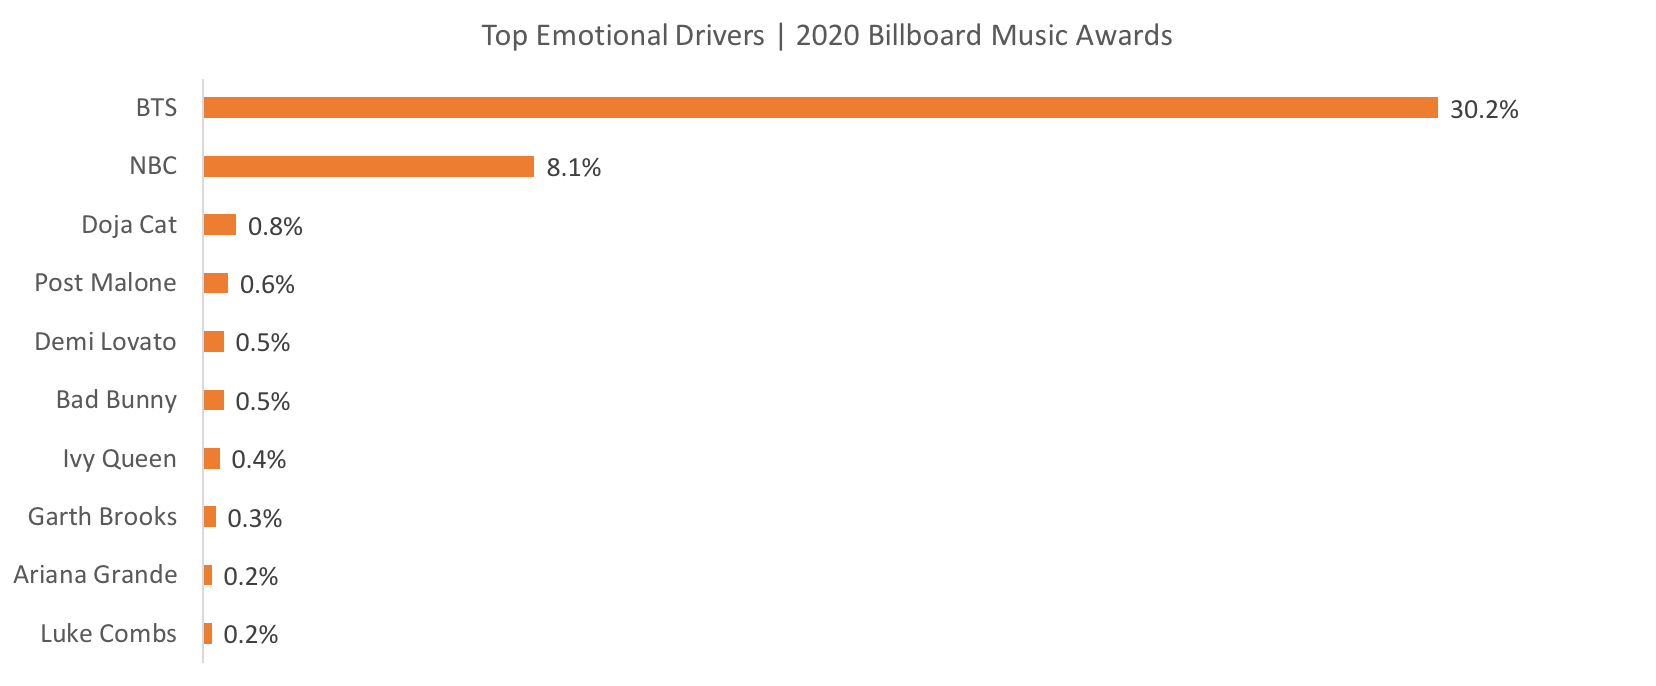 Source: Canvs, Top Emotional Drivers for the 2020 Billboard Music Awards Airtime Window + / - 3 Hours